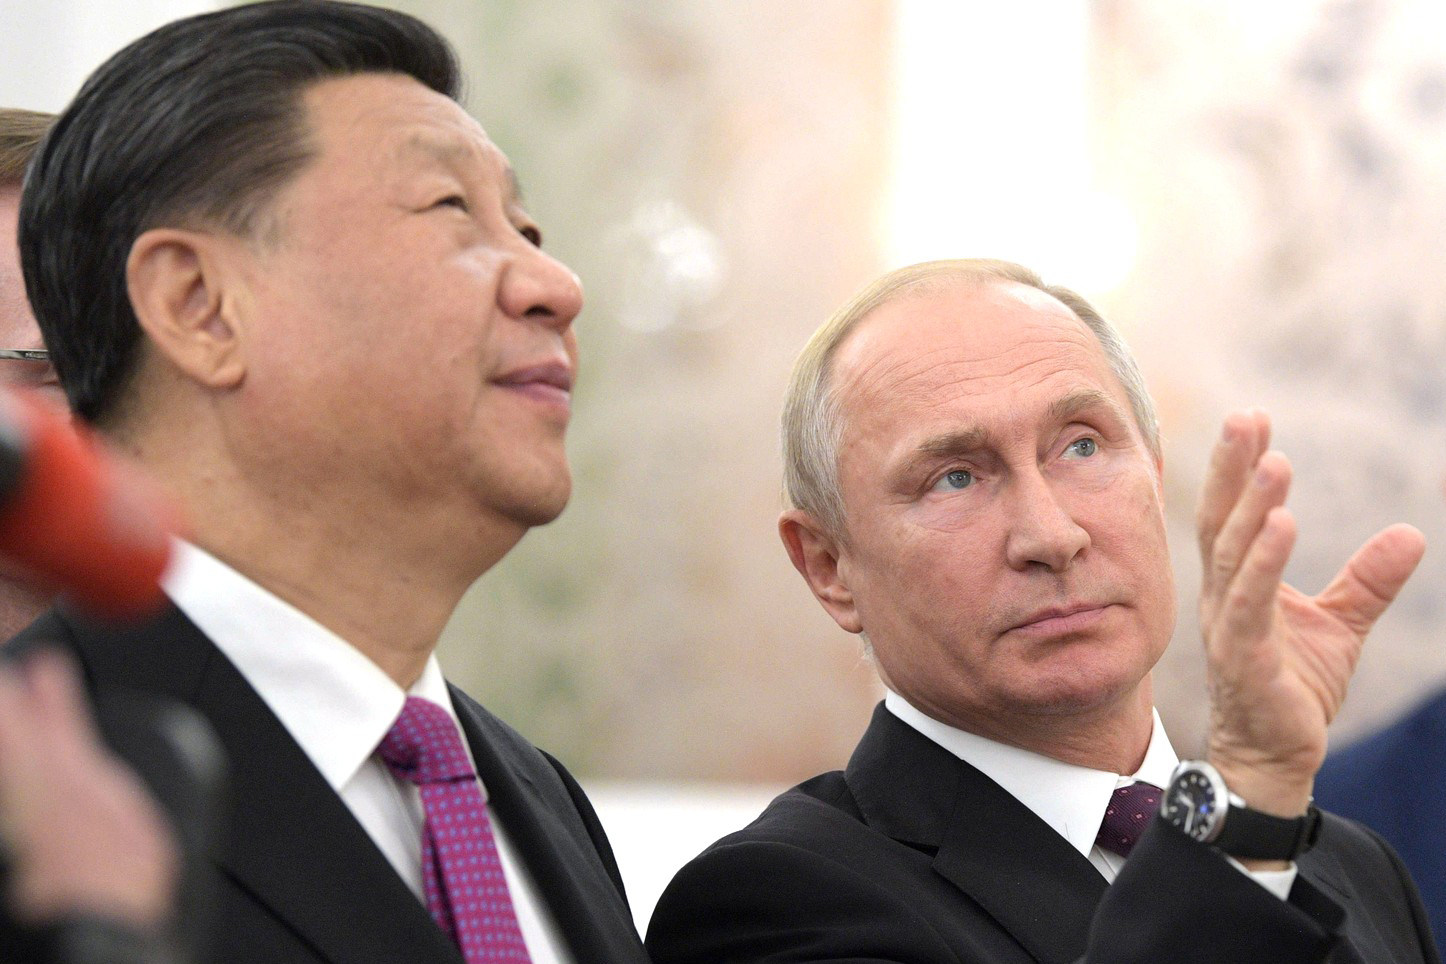 Chinese President Xi Jinping meets Russian President Vladimir Putin in Moscow on June 5, 2019. The China-Russia relationship, while not a formal alliance, has been described as being more than an alliance. Photo: Kremlin/dpa 